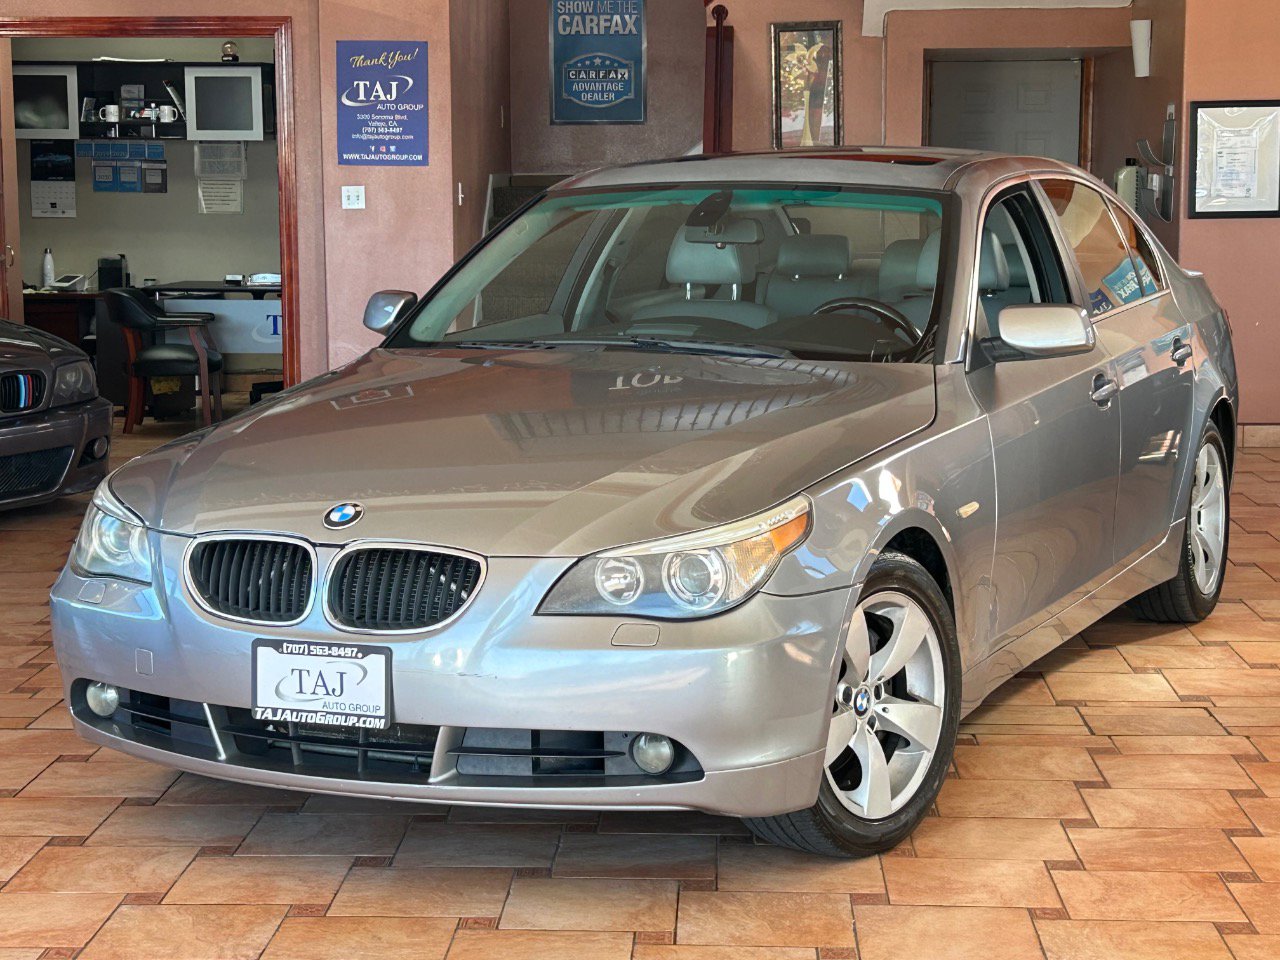 Used 2005 BMW 525i for Sale Right Now - Autotrader